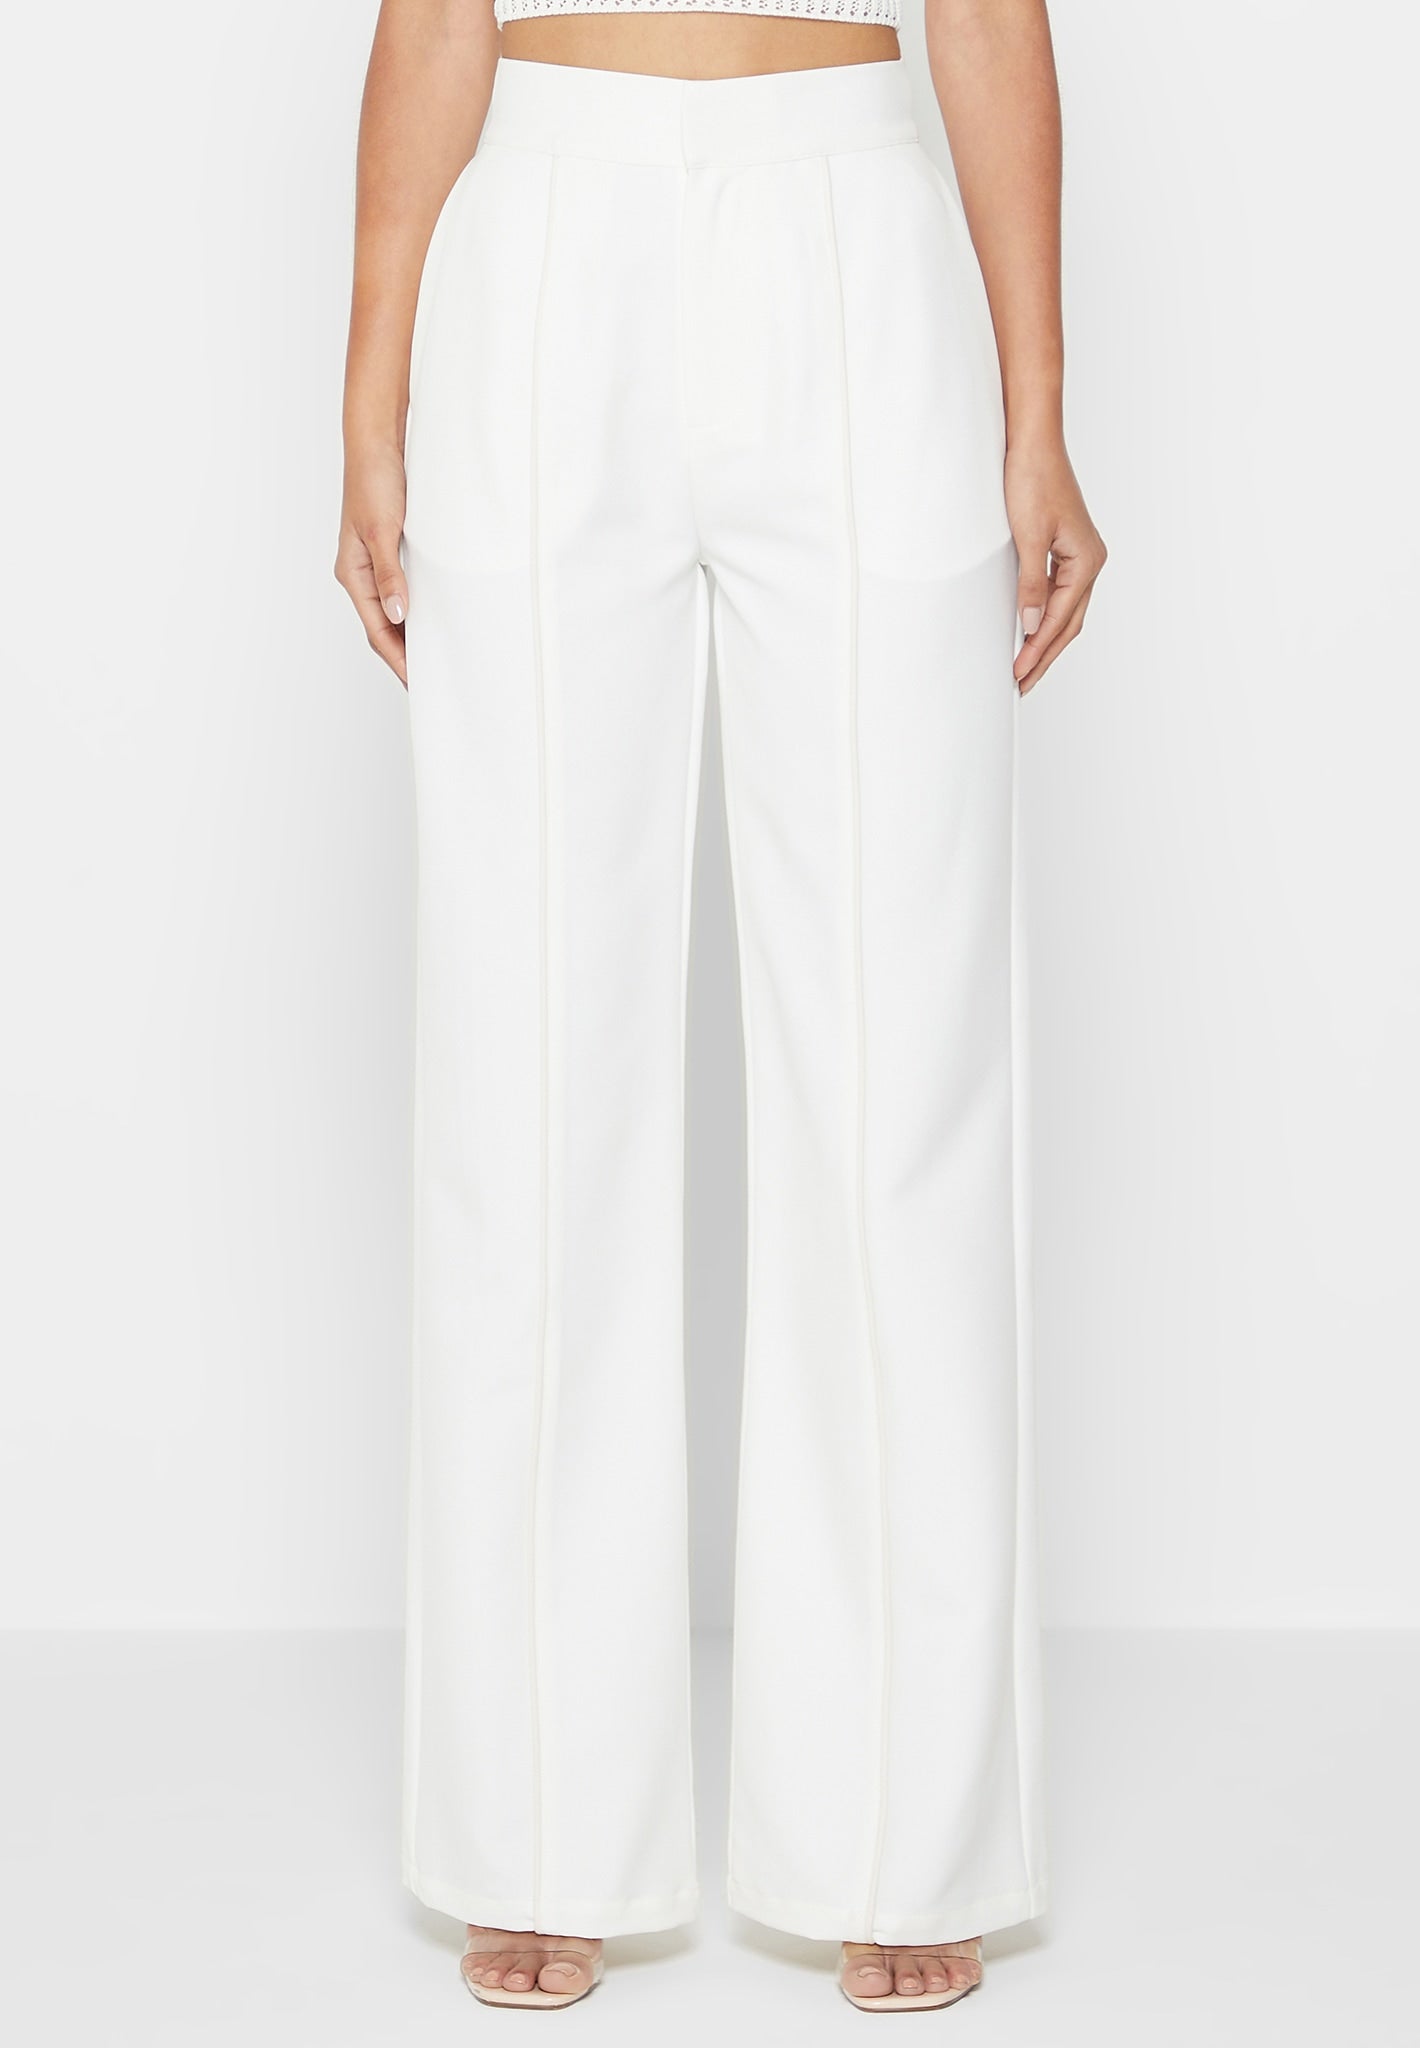 trousers-with-vegan-leather-pintuck-white